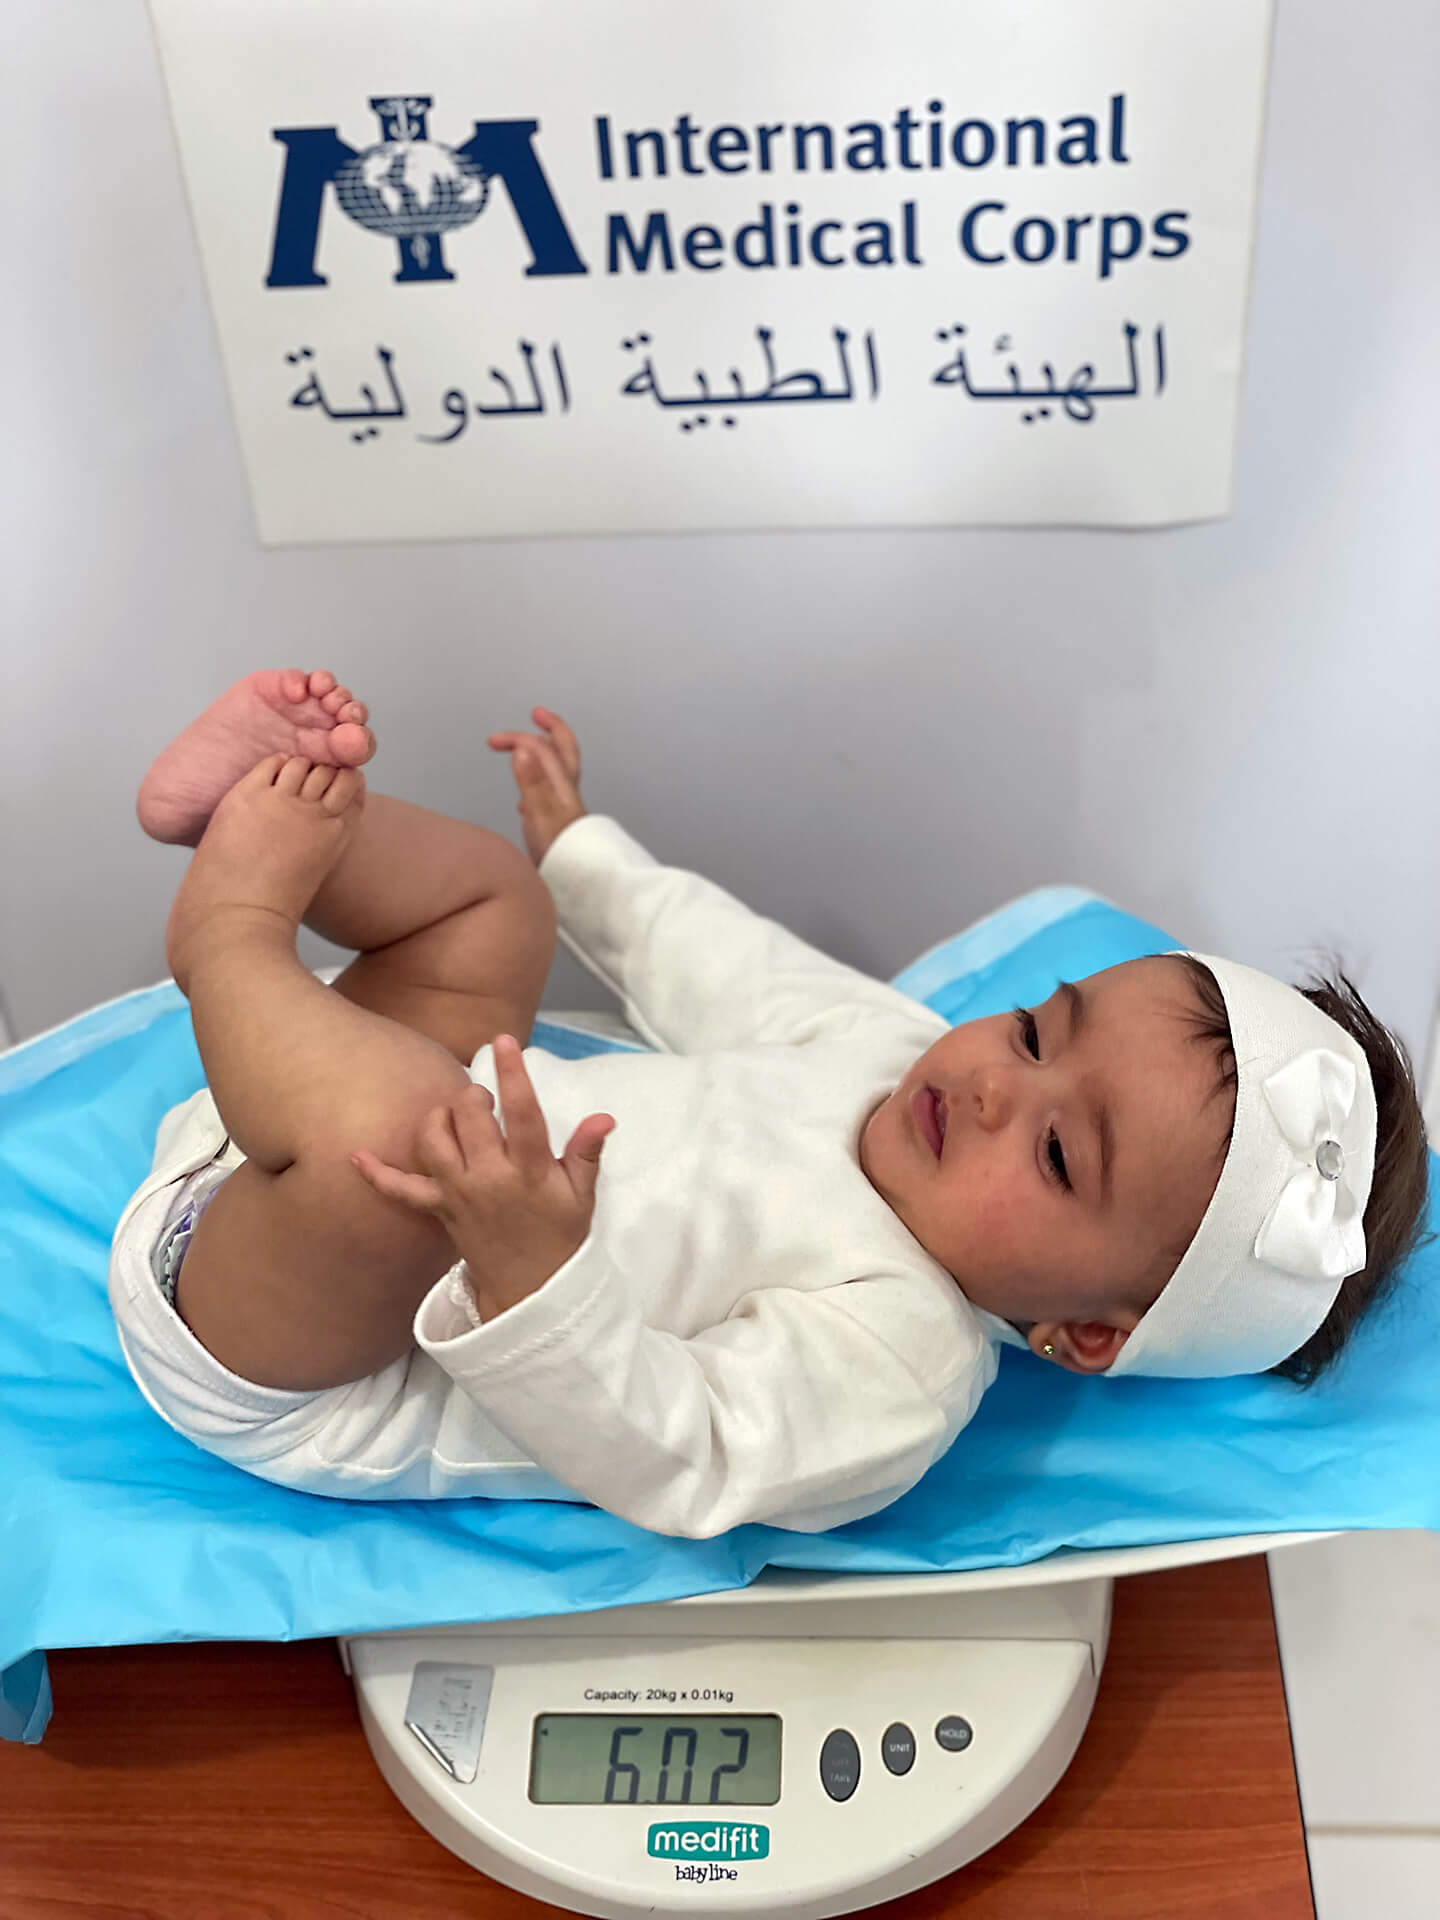 Miral was born in August 2021 at a hospital outside Zaatari camp, Jordan. Our nutrition counsellor helped Miral’s mother with best practices around breastfeeding, including achieving good positioning and attachment.